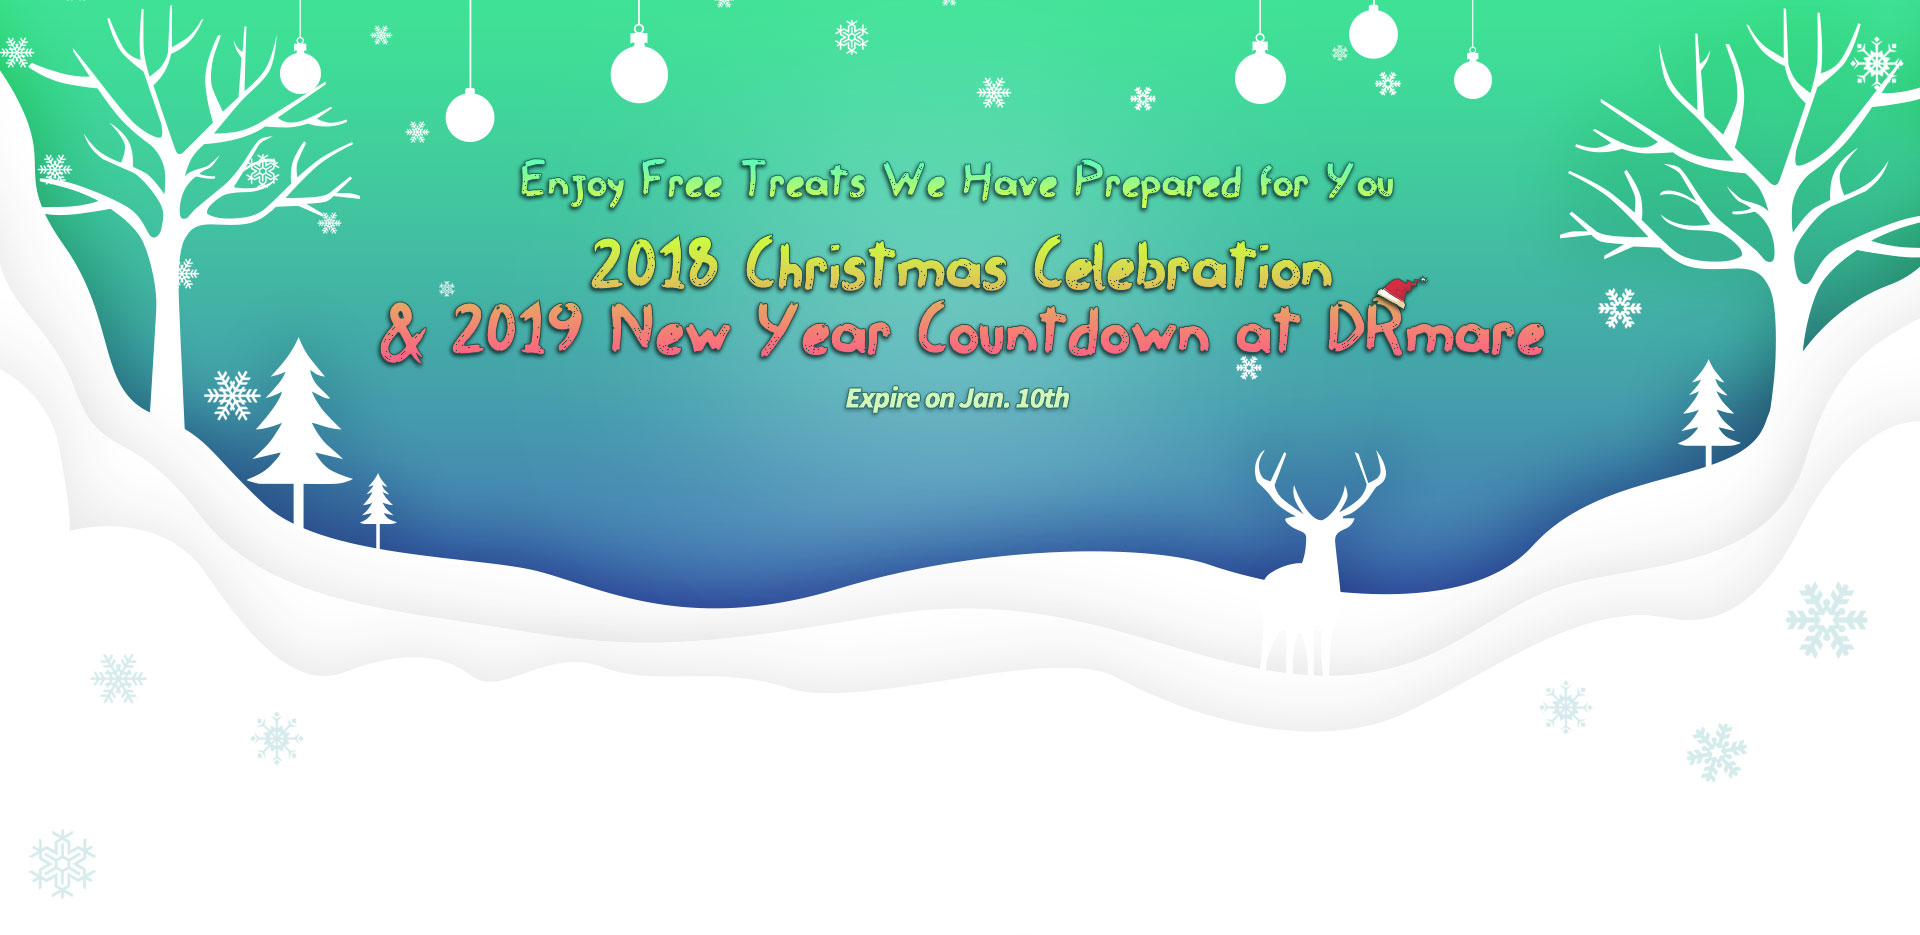 2018 Christmas Celebration & 2019 New Year Countdown at DRmare